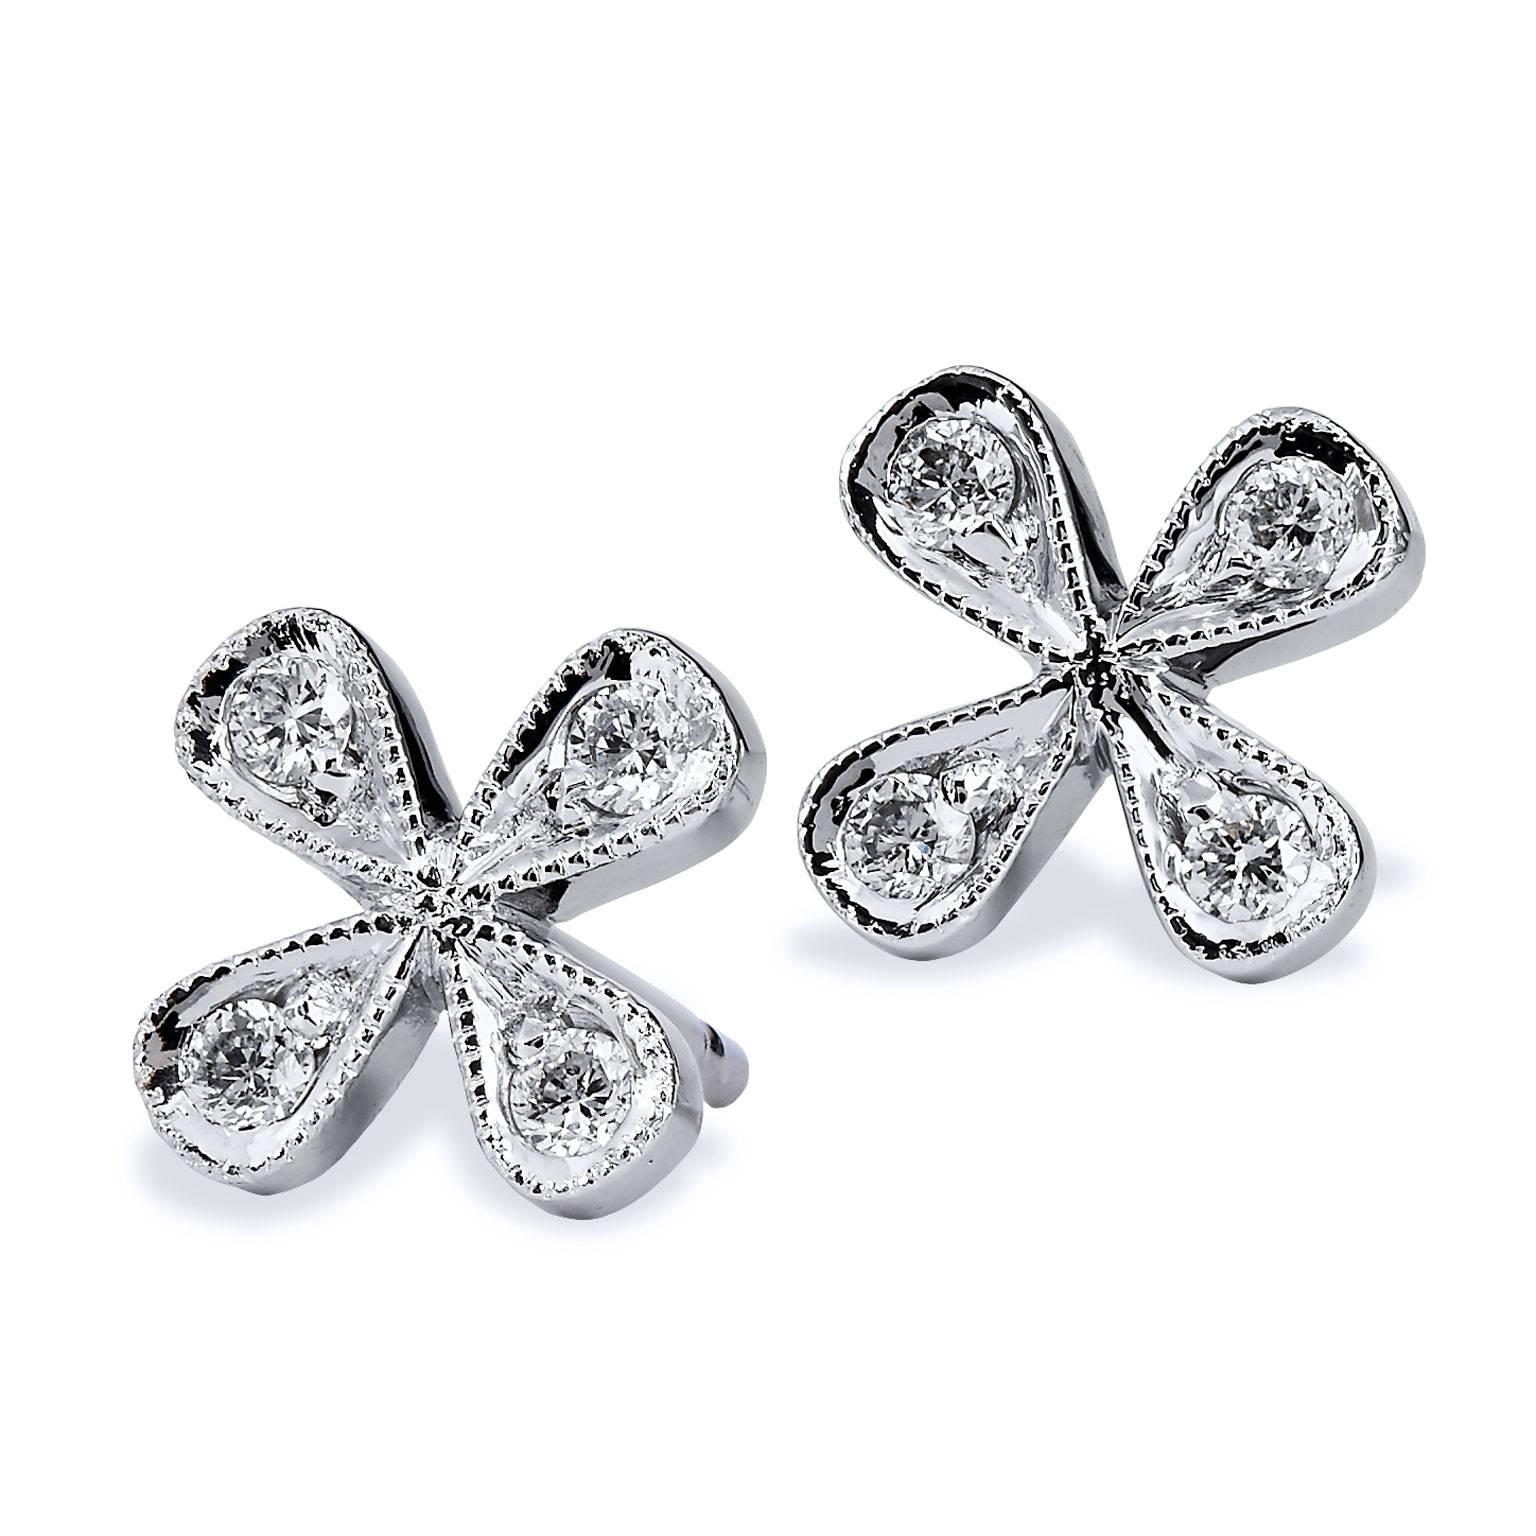 This sweet and simple H & H original design features 14 karat white gold fashioned in the shape of a four petal flower. Eight diamonds, with a total weight of 0.15 carat (H/SI2/I1), are pave set with milgrain work along the perimeter. Exude a fun